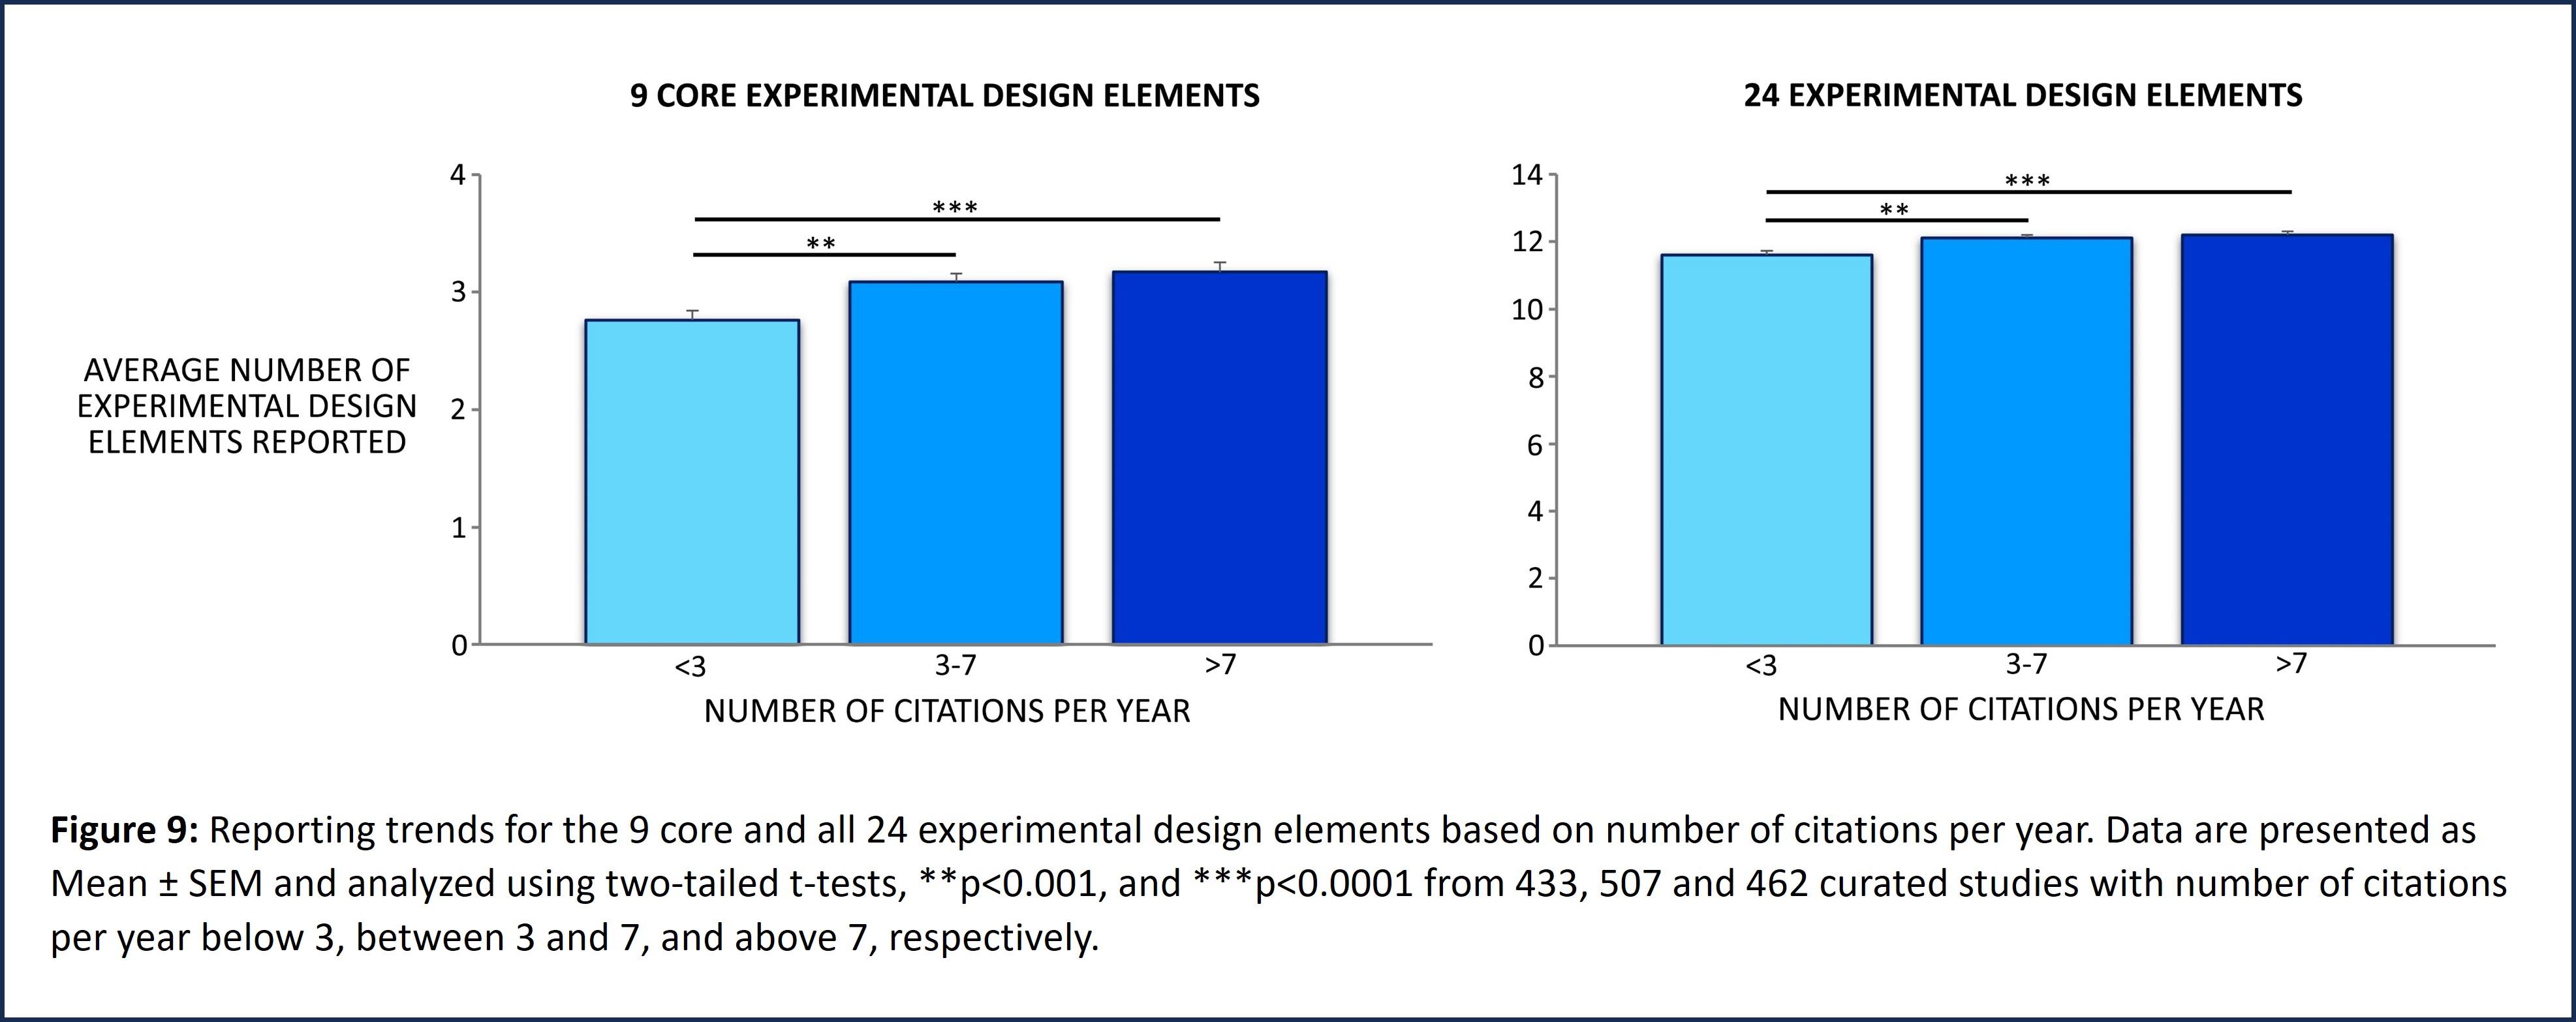 Graph shows reporting of 9 core experimental design elements based on citations per year